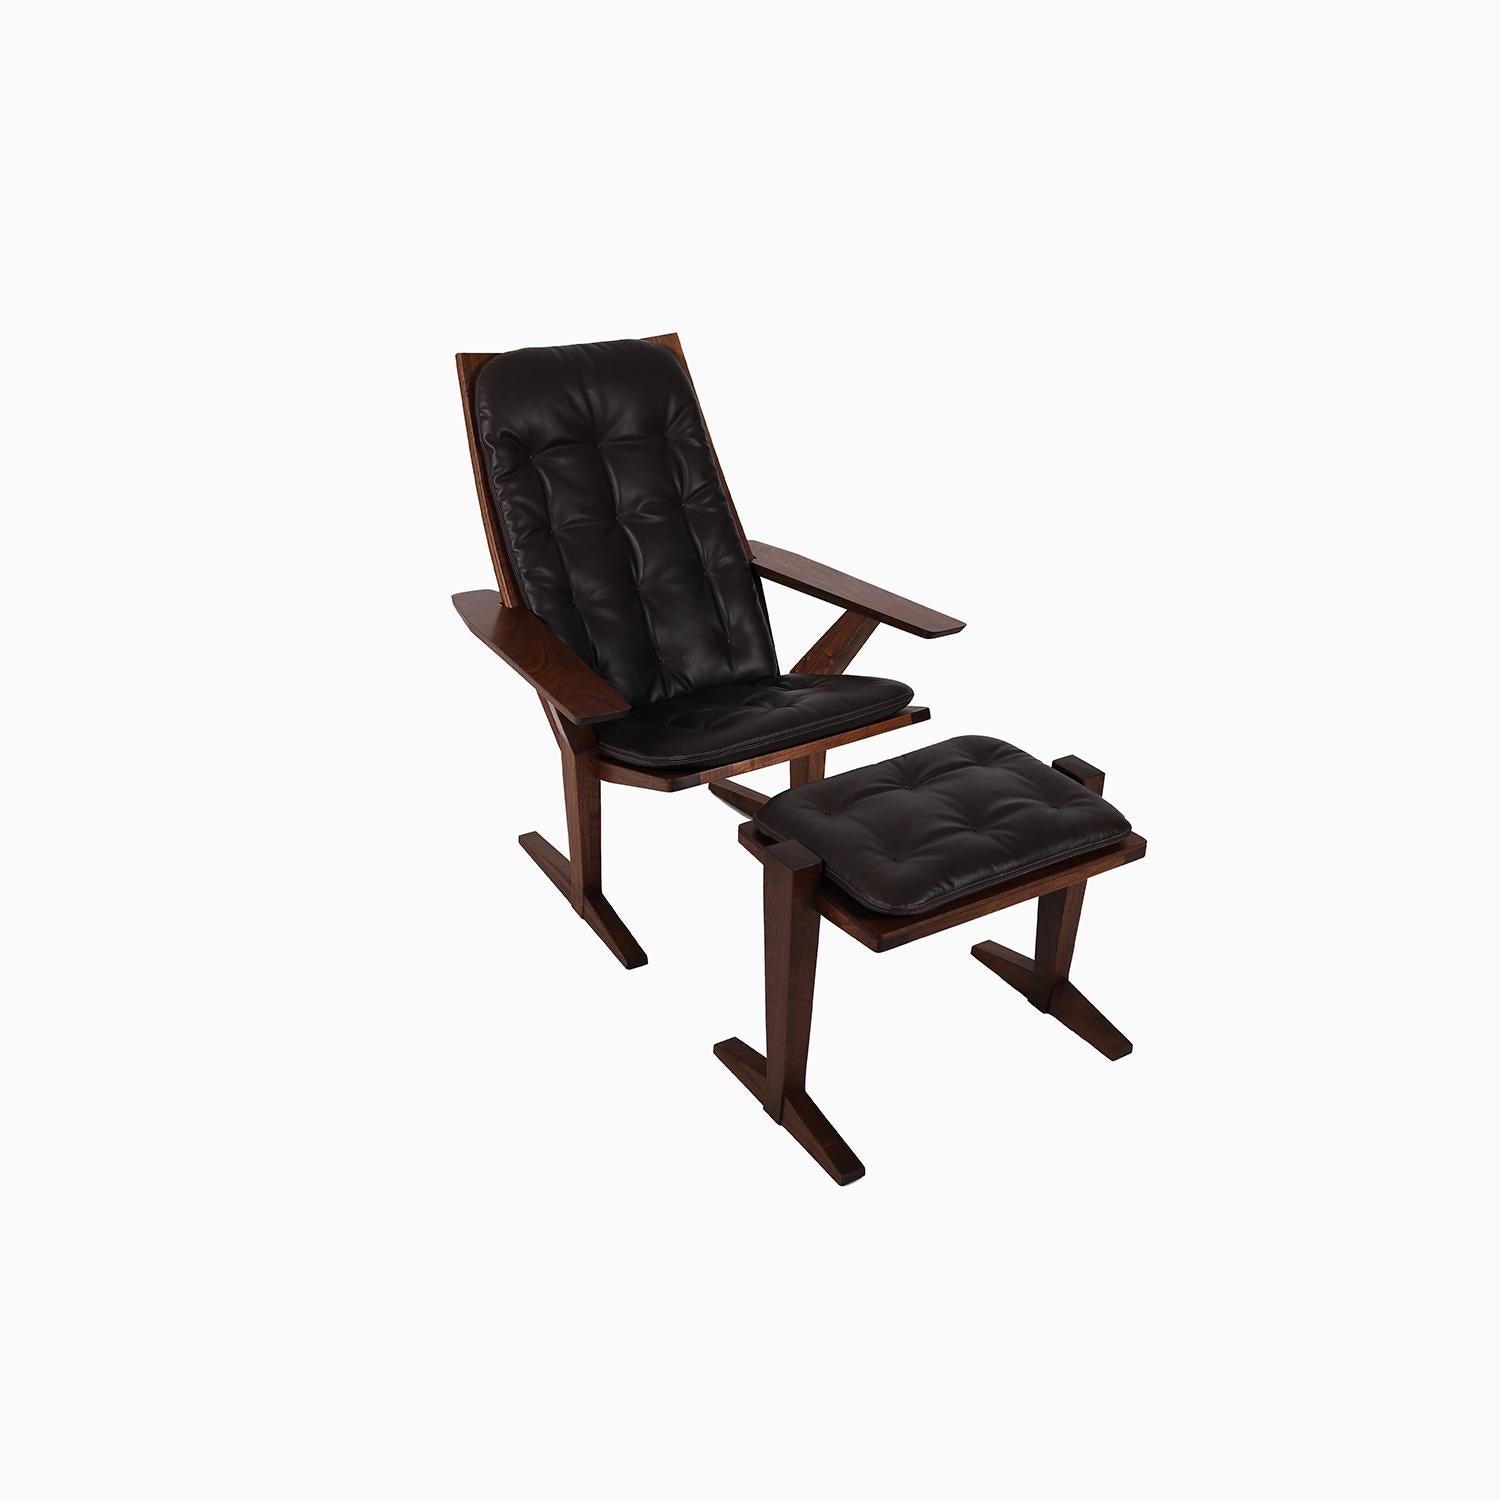 A new interior seating piece, reminiscent of an ultimately-refined adirondack chair.   This lounge and ottoman have been handmade using old growth black walnut, finished in oil.    Tufted upholstery in a supple espresso colored leather.  